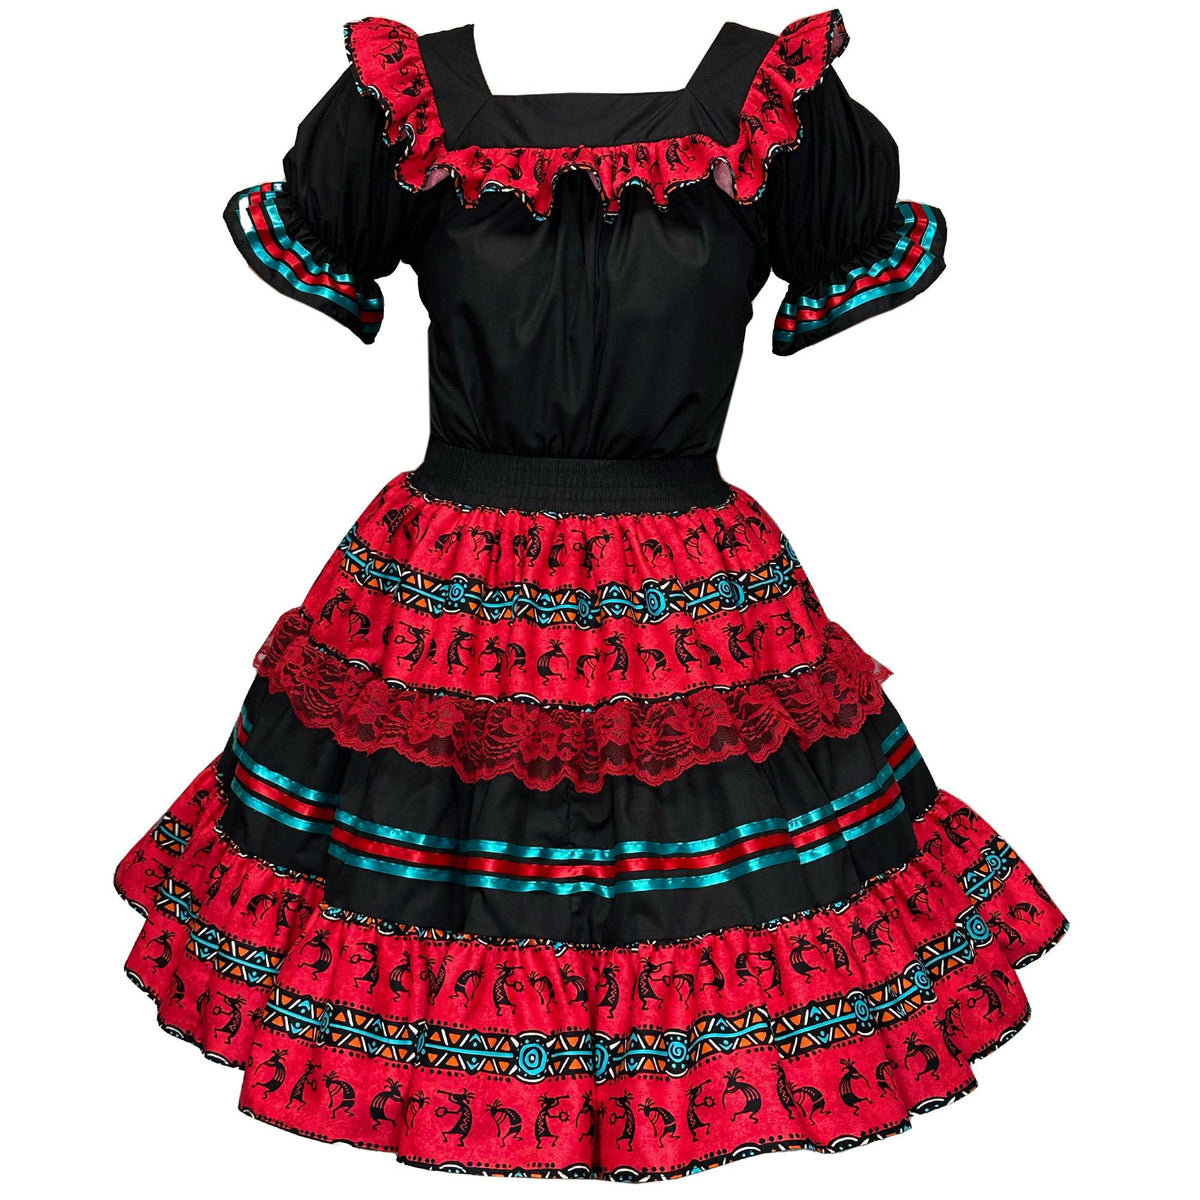 Kokopelli Square Dance Outfit